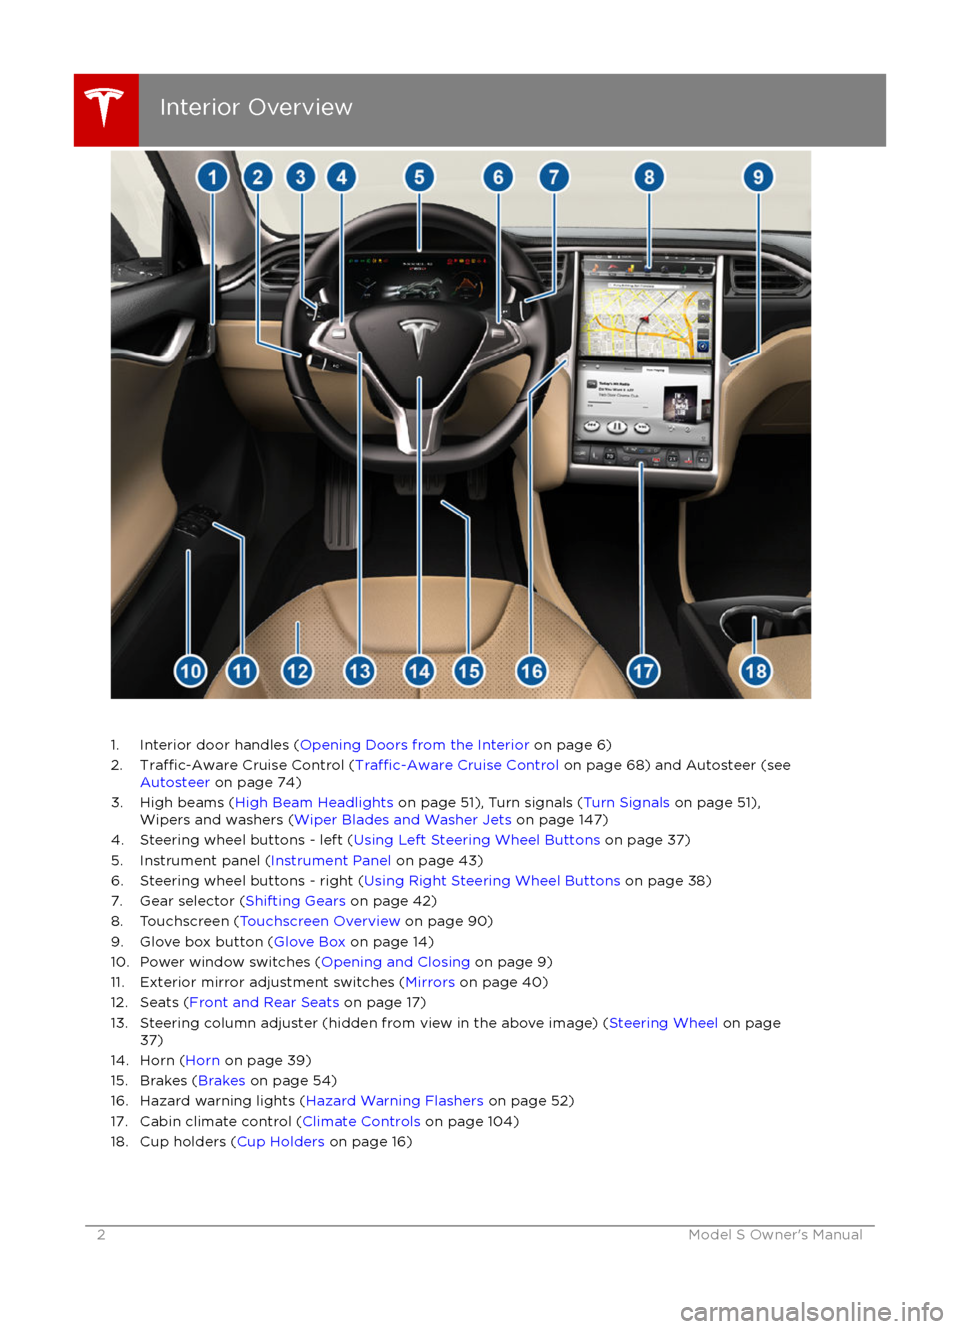 TESLA MODEL S 2016  Owners Manual 1. Interior door handles (Opening Doors from the Interior  on page 6)
2.Traffic-Aware Cruise Control (Traffic-Aware Cruise Control  on page 68) and Autosteer (see 
Autosteer  on page 74)
3. High beams